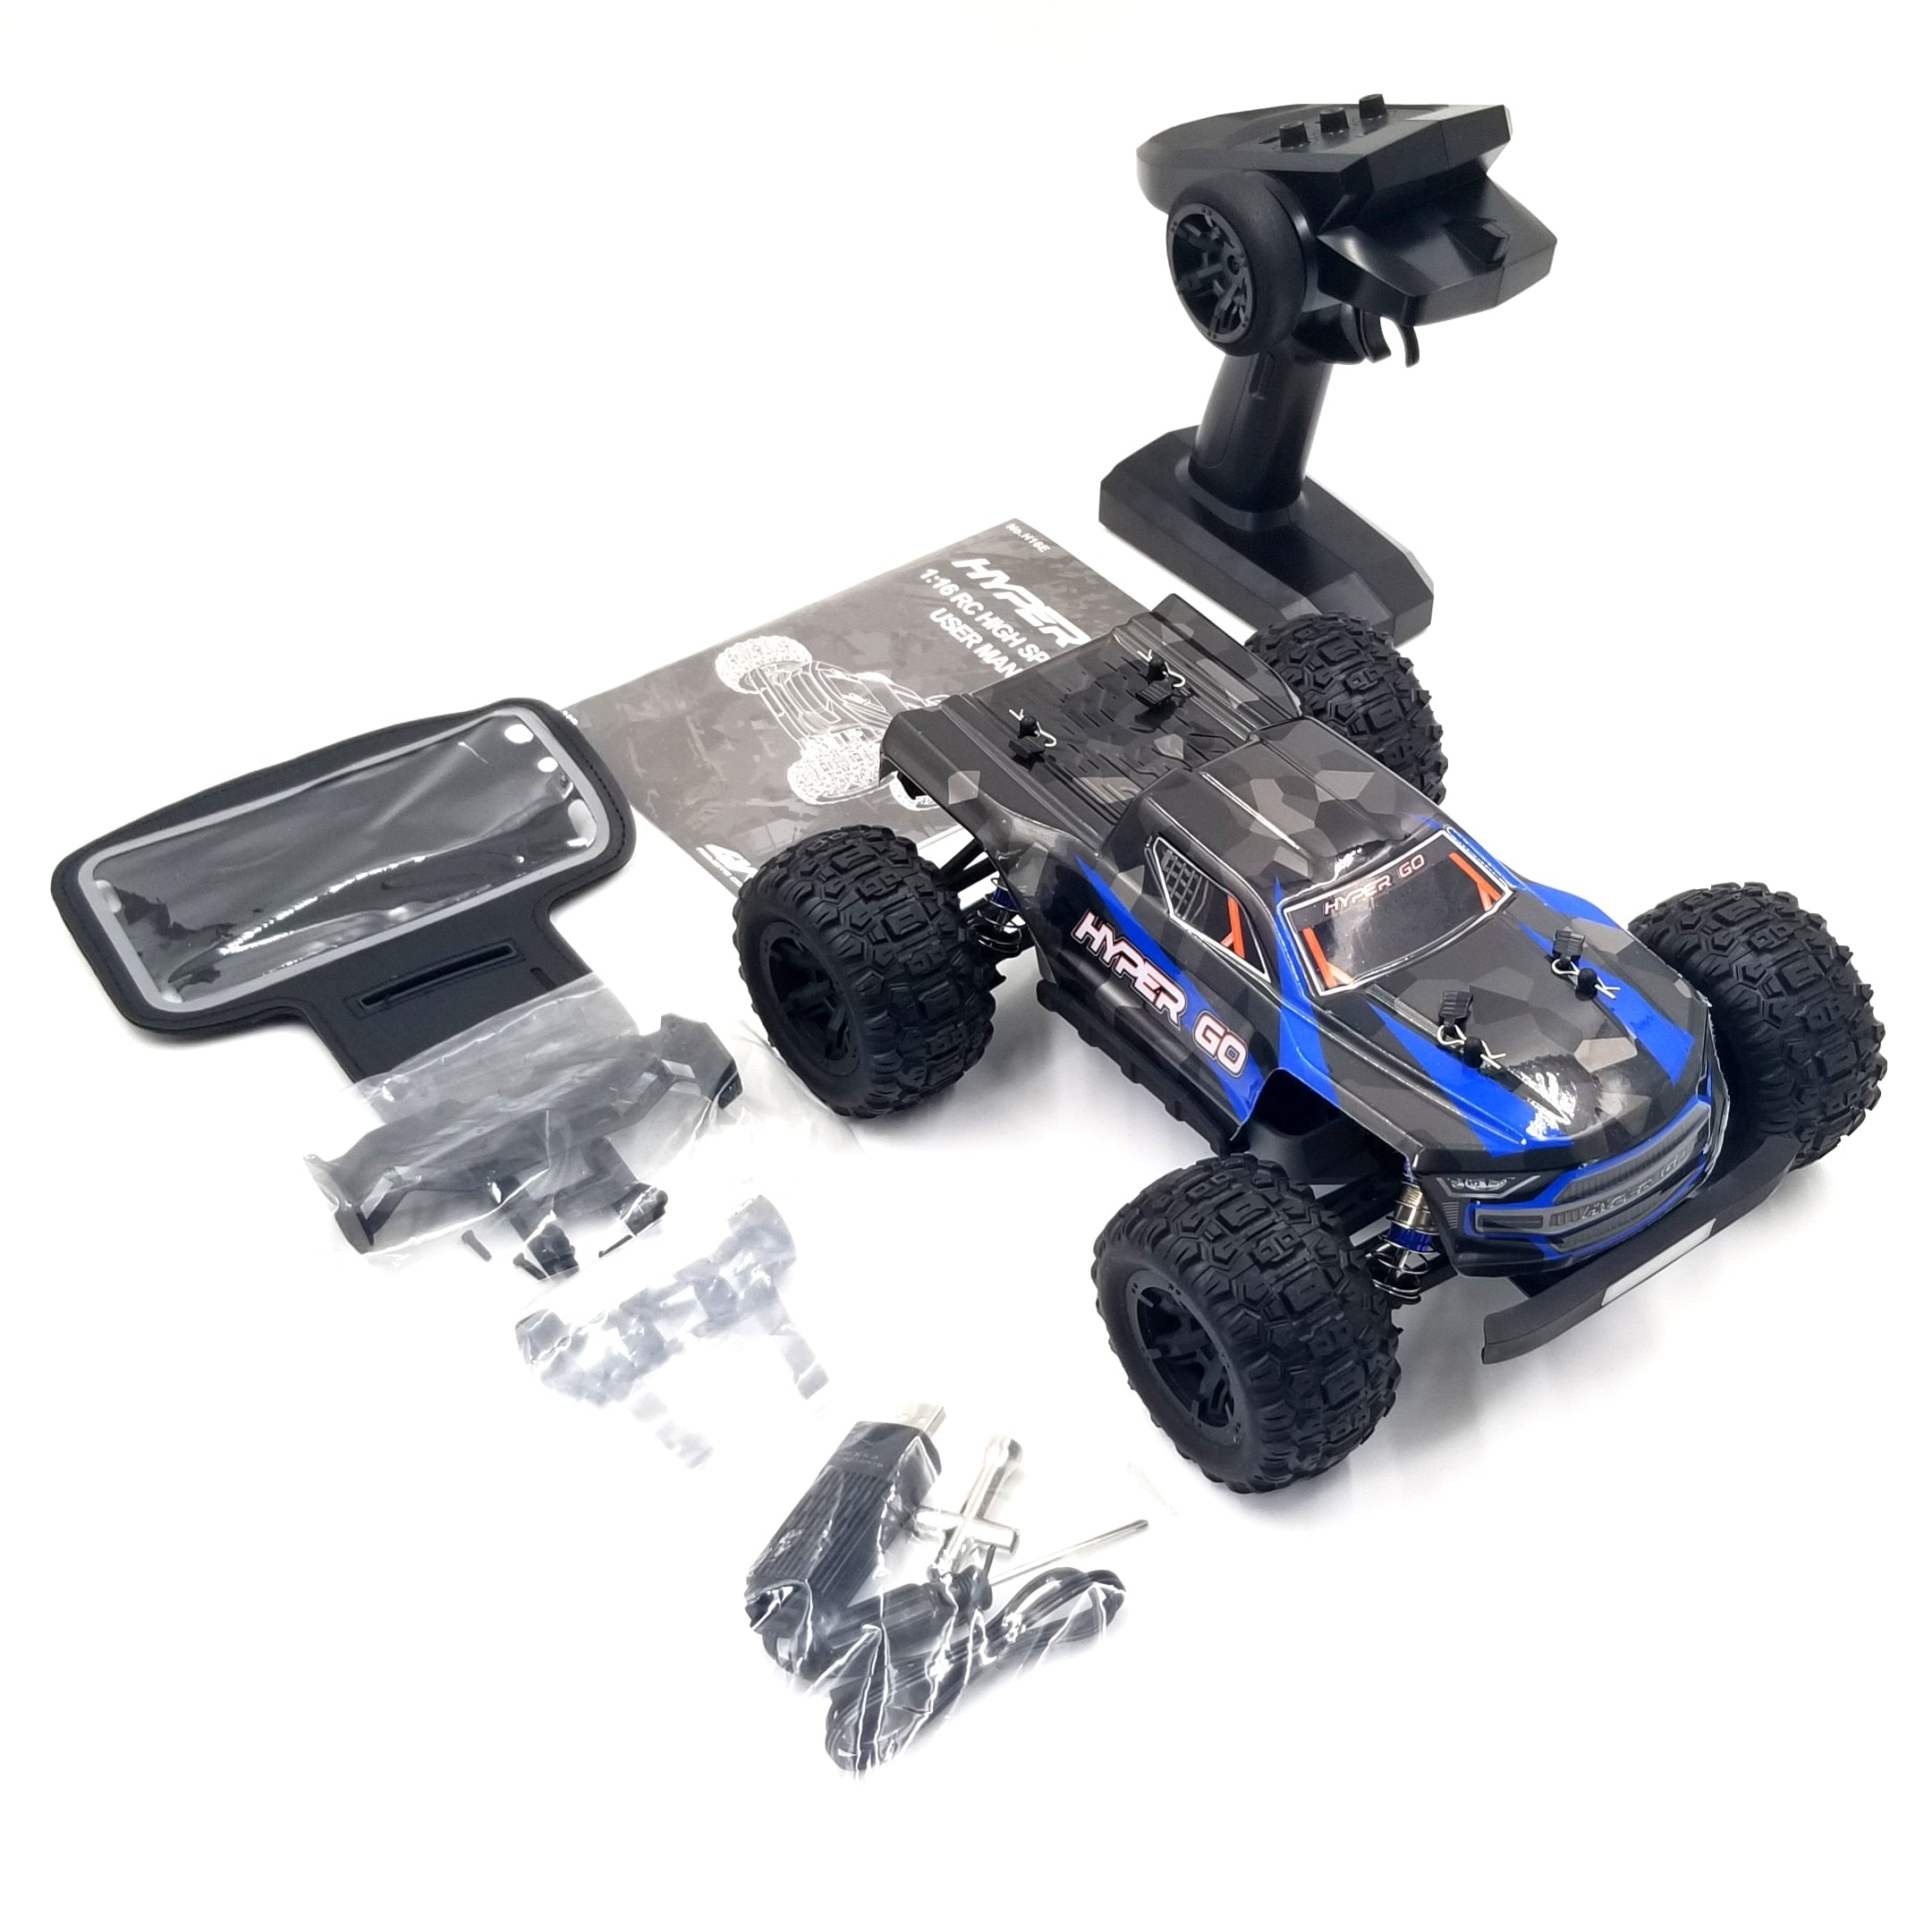 MJX HYPER GO H16H AND H16E REVIEW - A VERY DURABLE RC TRUCK WITH